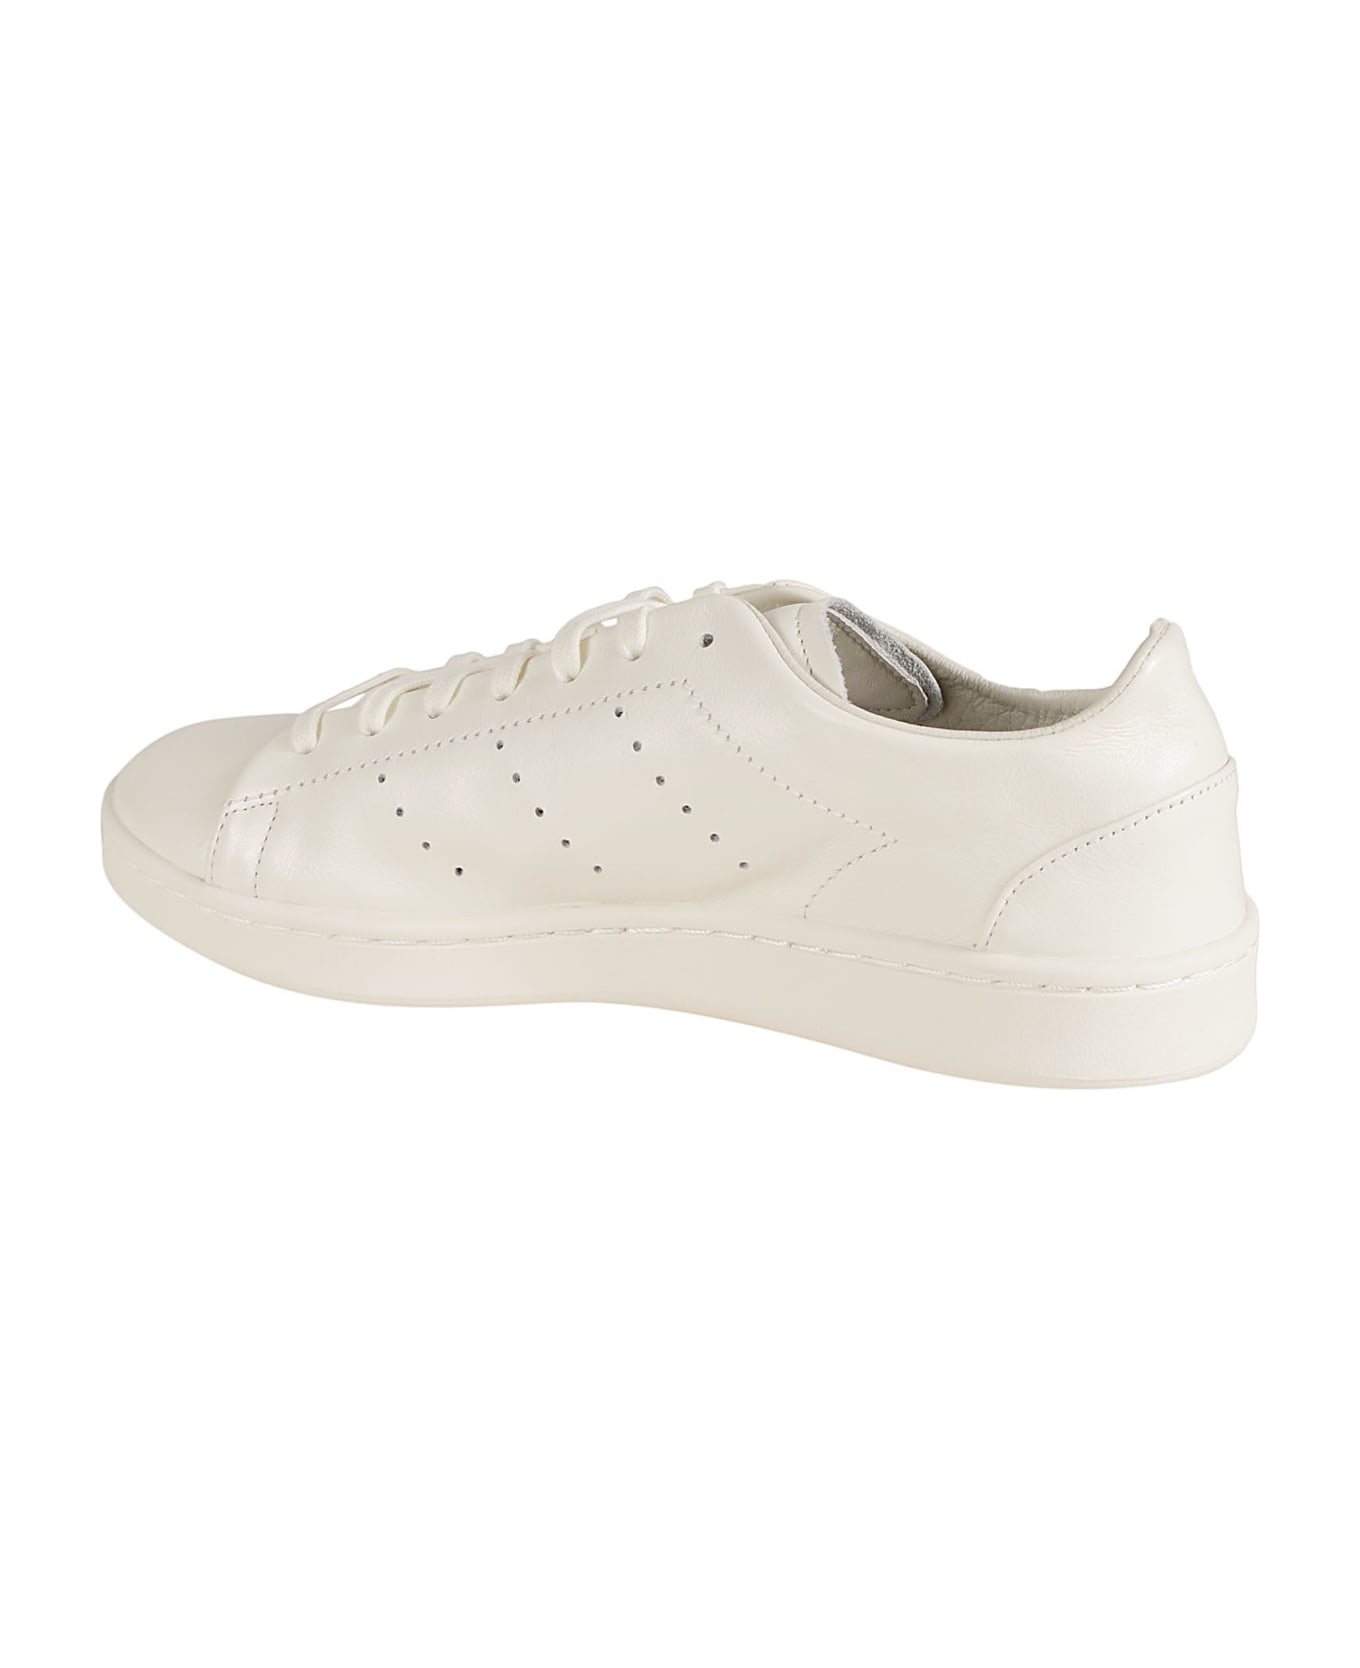 Y-3 Stan Smith Sneakers - White/Black スニーカー